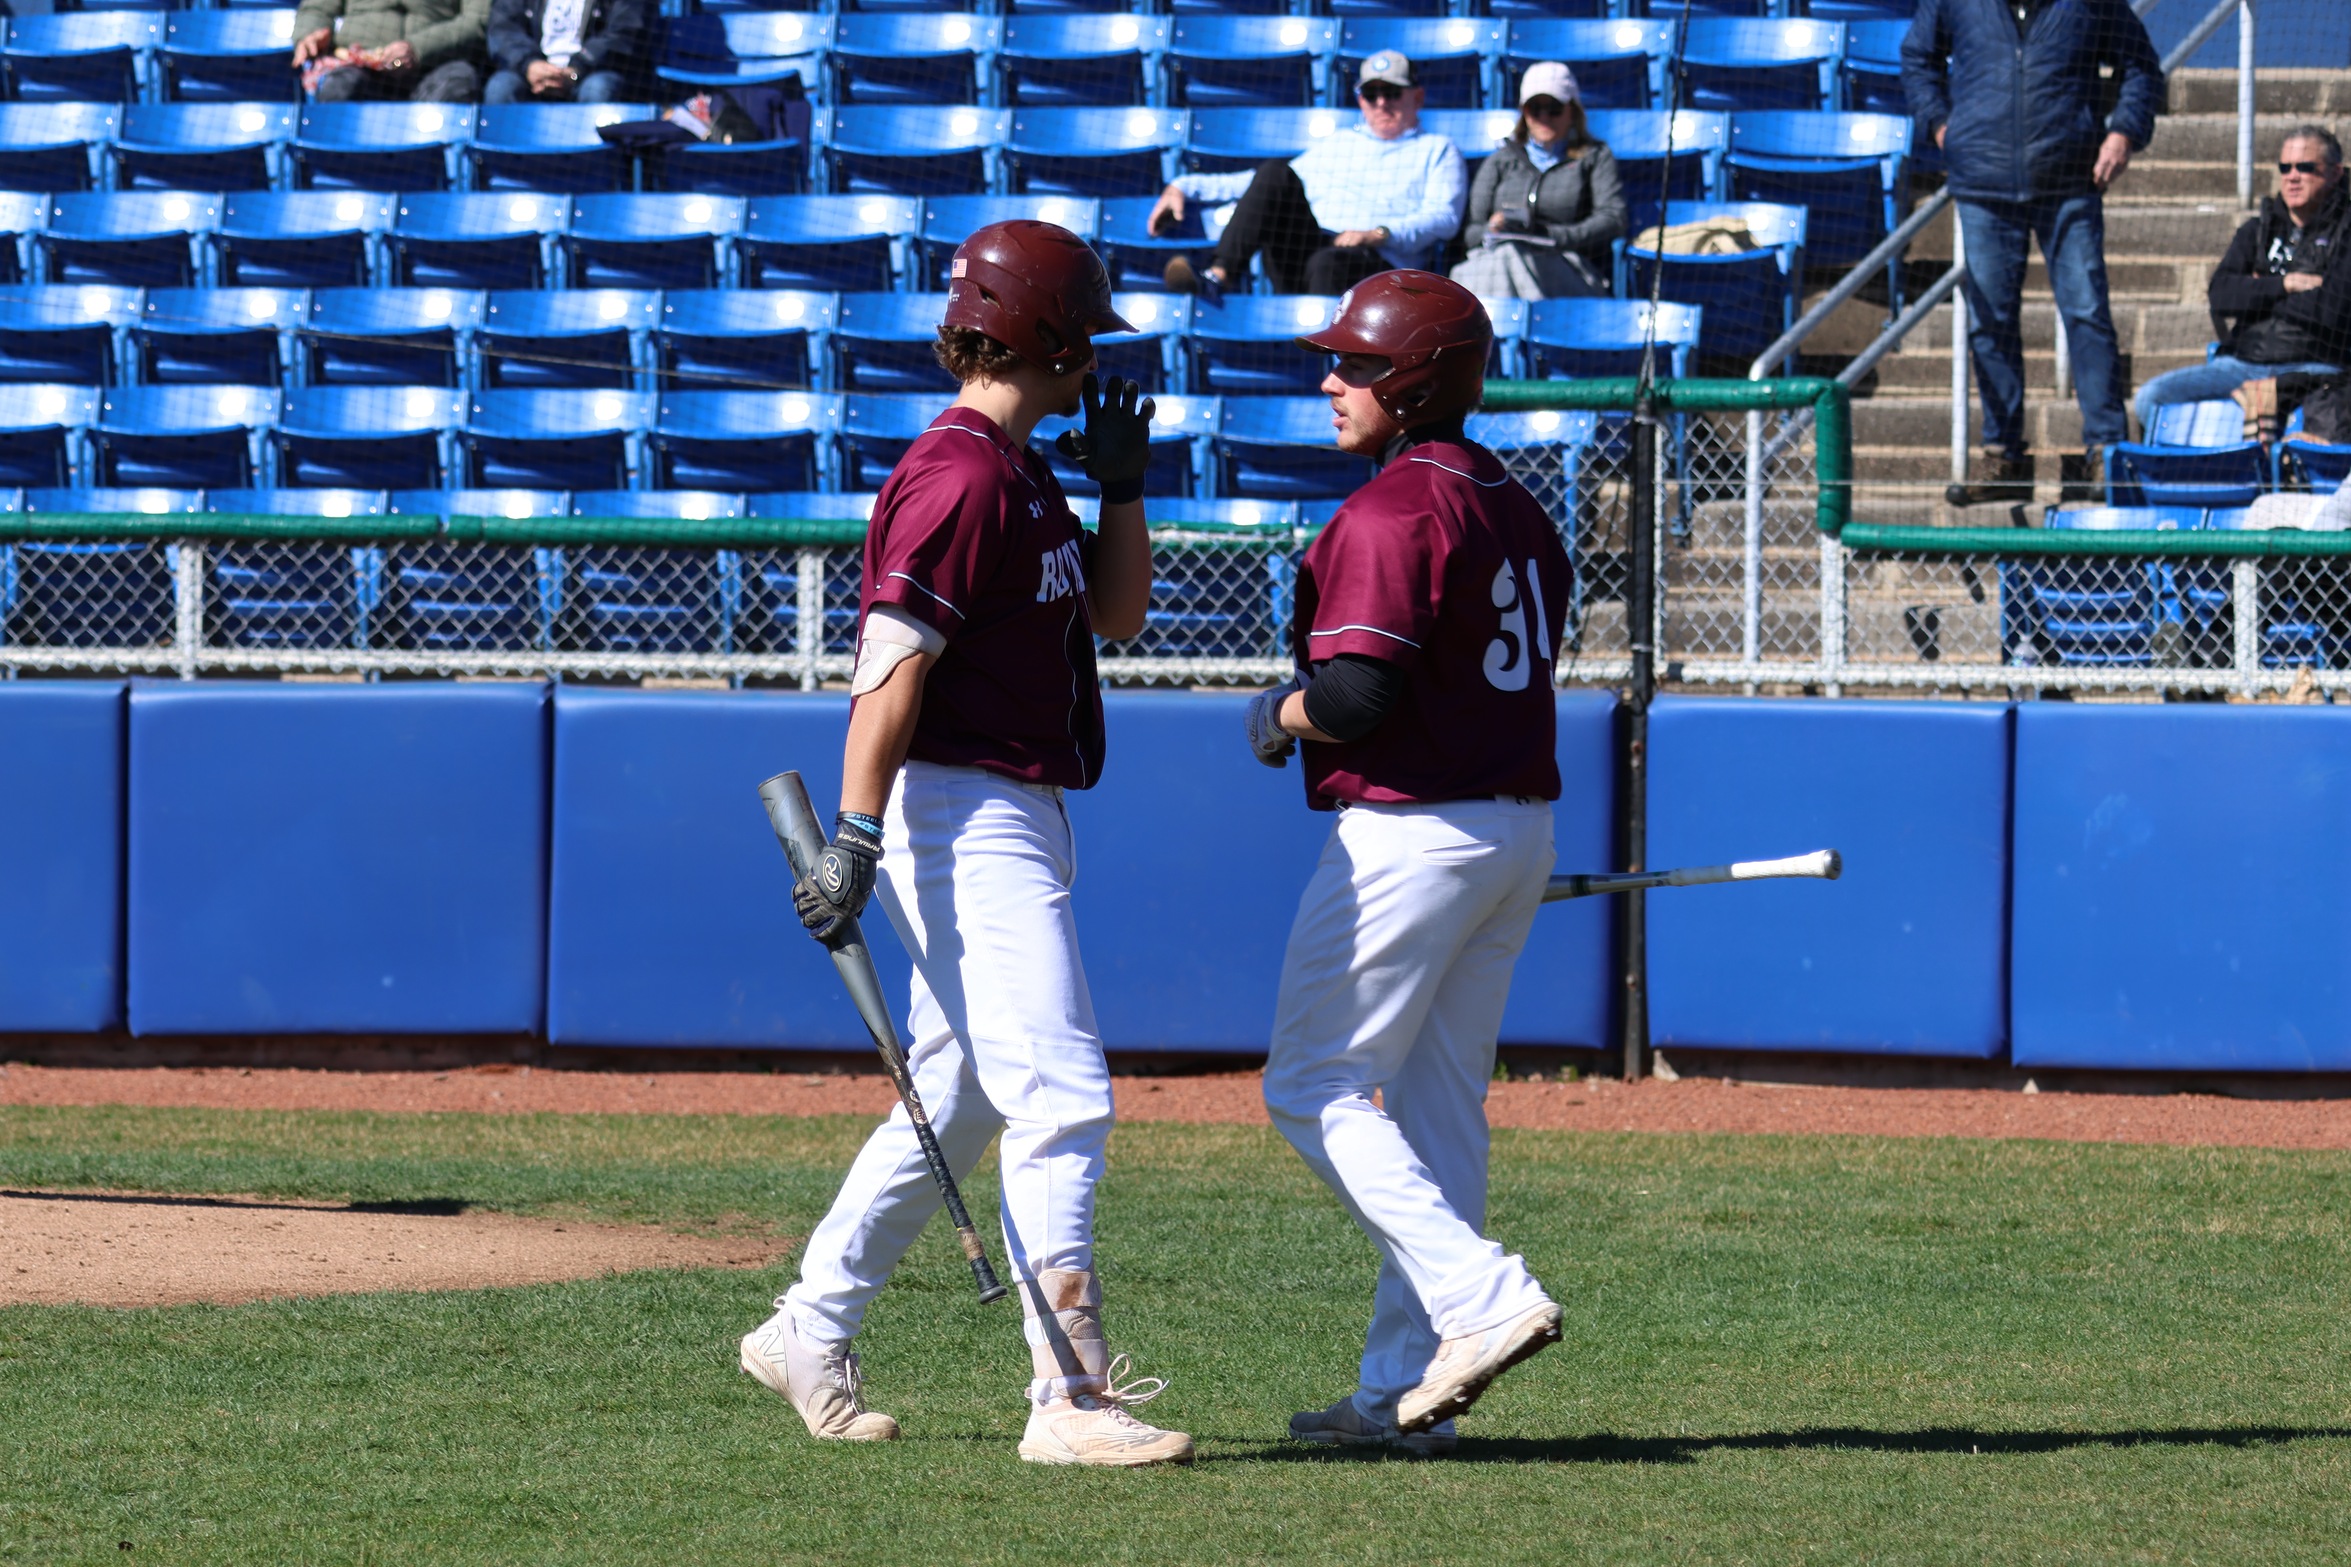 Maroons Fall to No. 3 Shenandoah in Game 2 of ODAC Championship Weekend